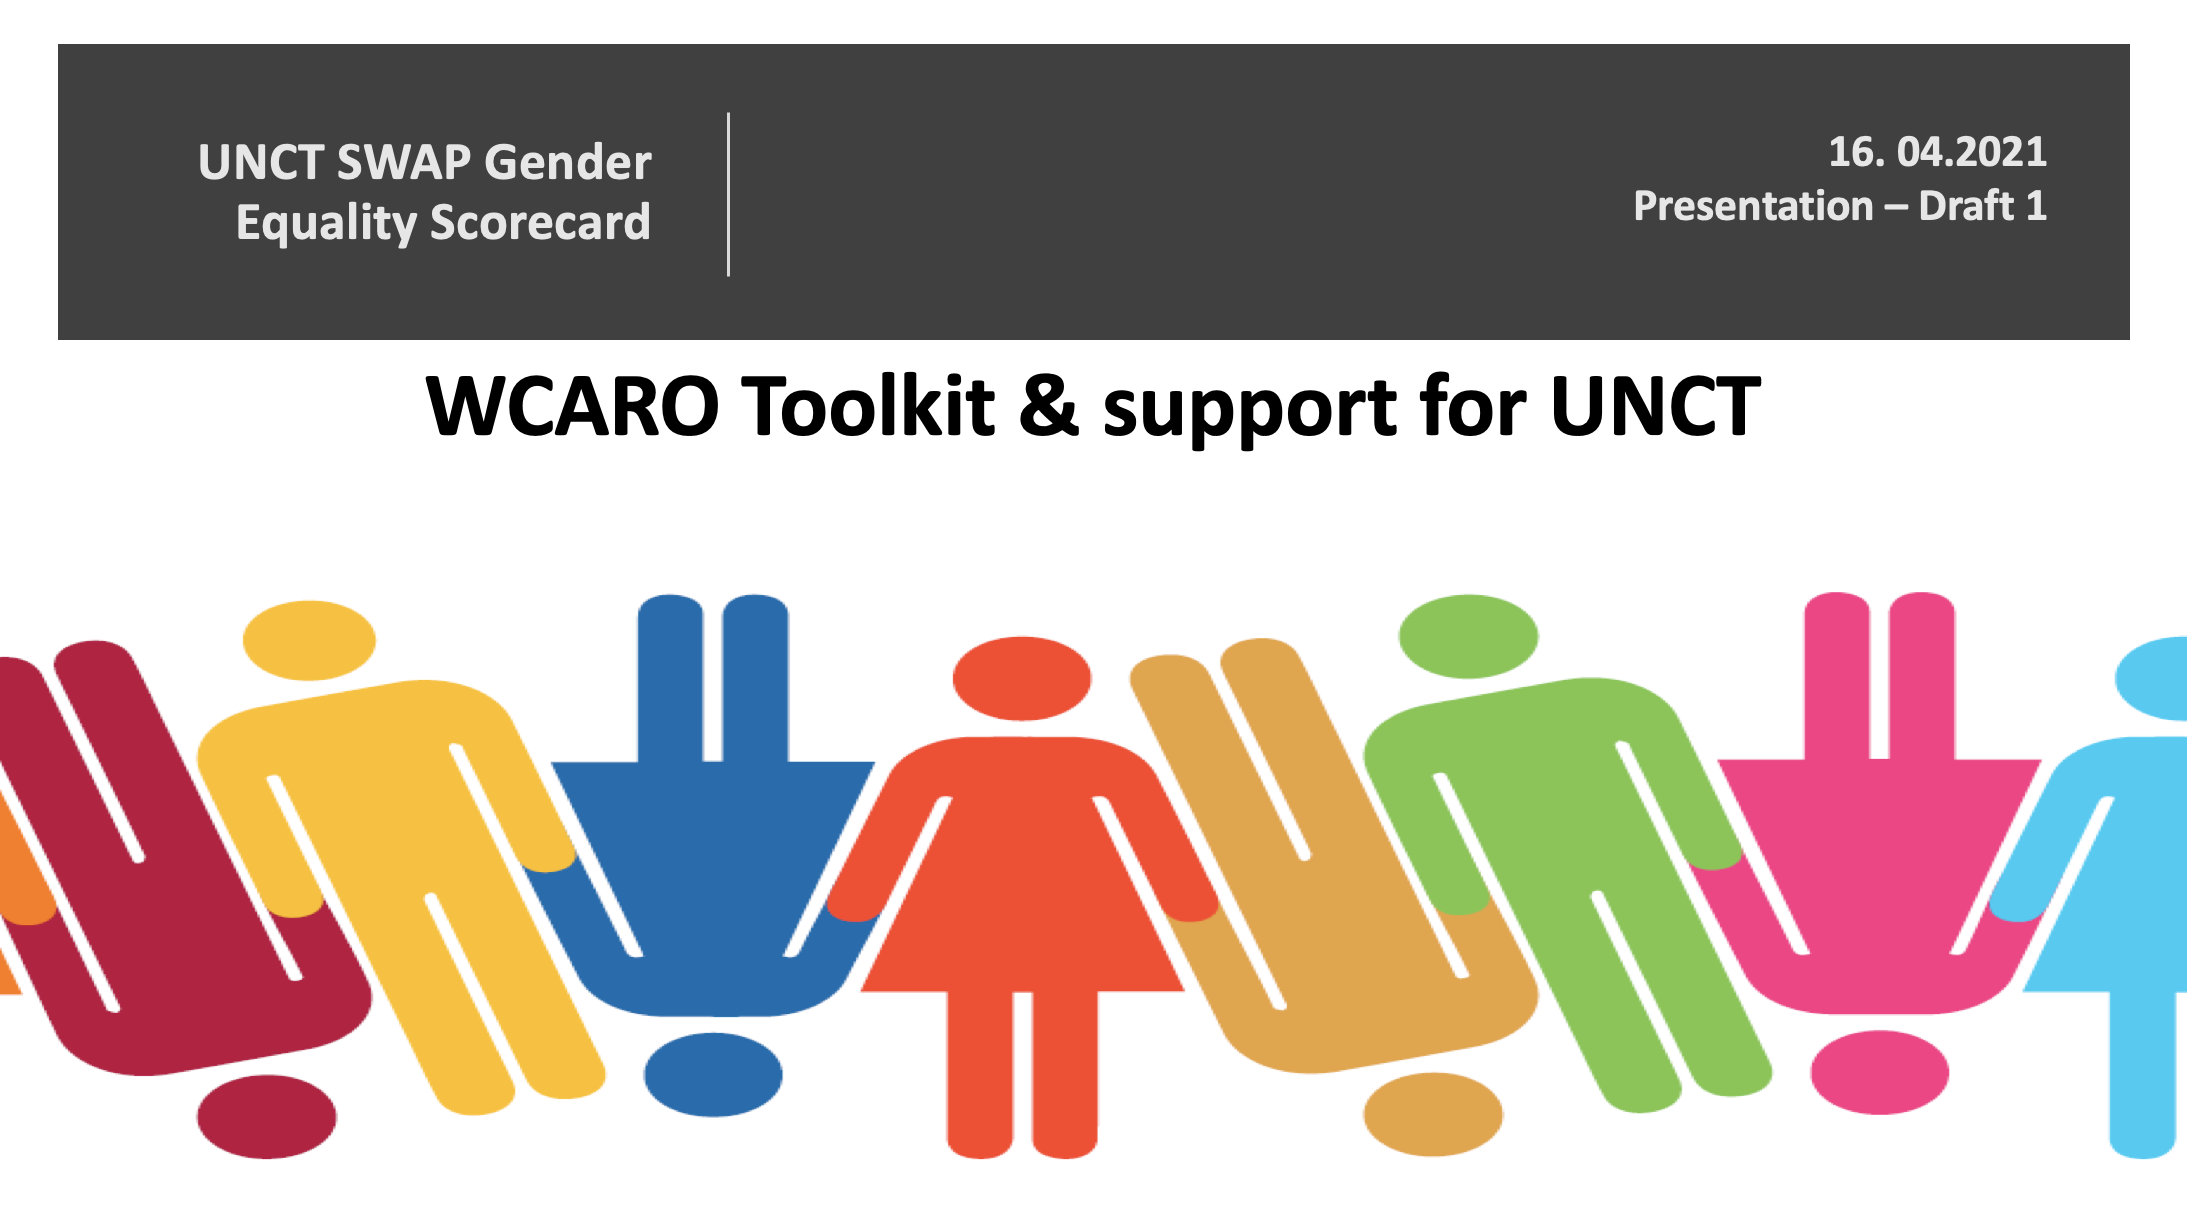 “HOW-TO-DO” TOOLKIT for the UNCT-SWAP Gender Equality SCORECARD - West and Central Africa region.